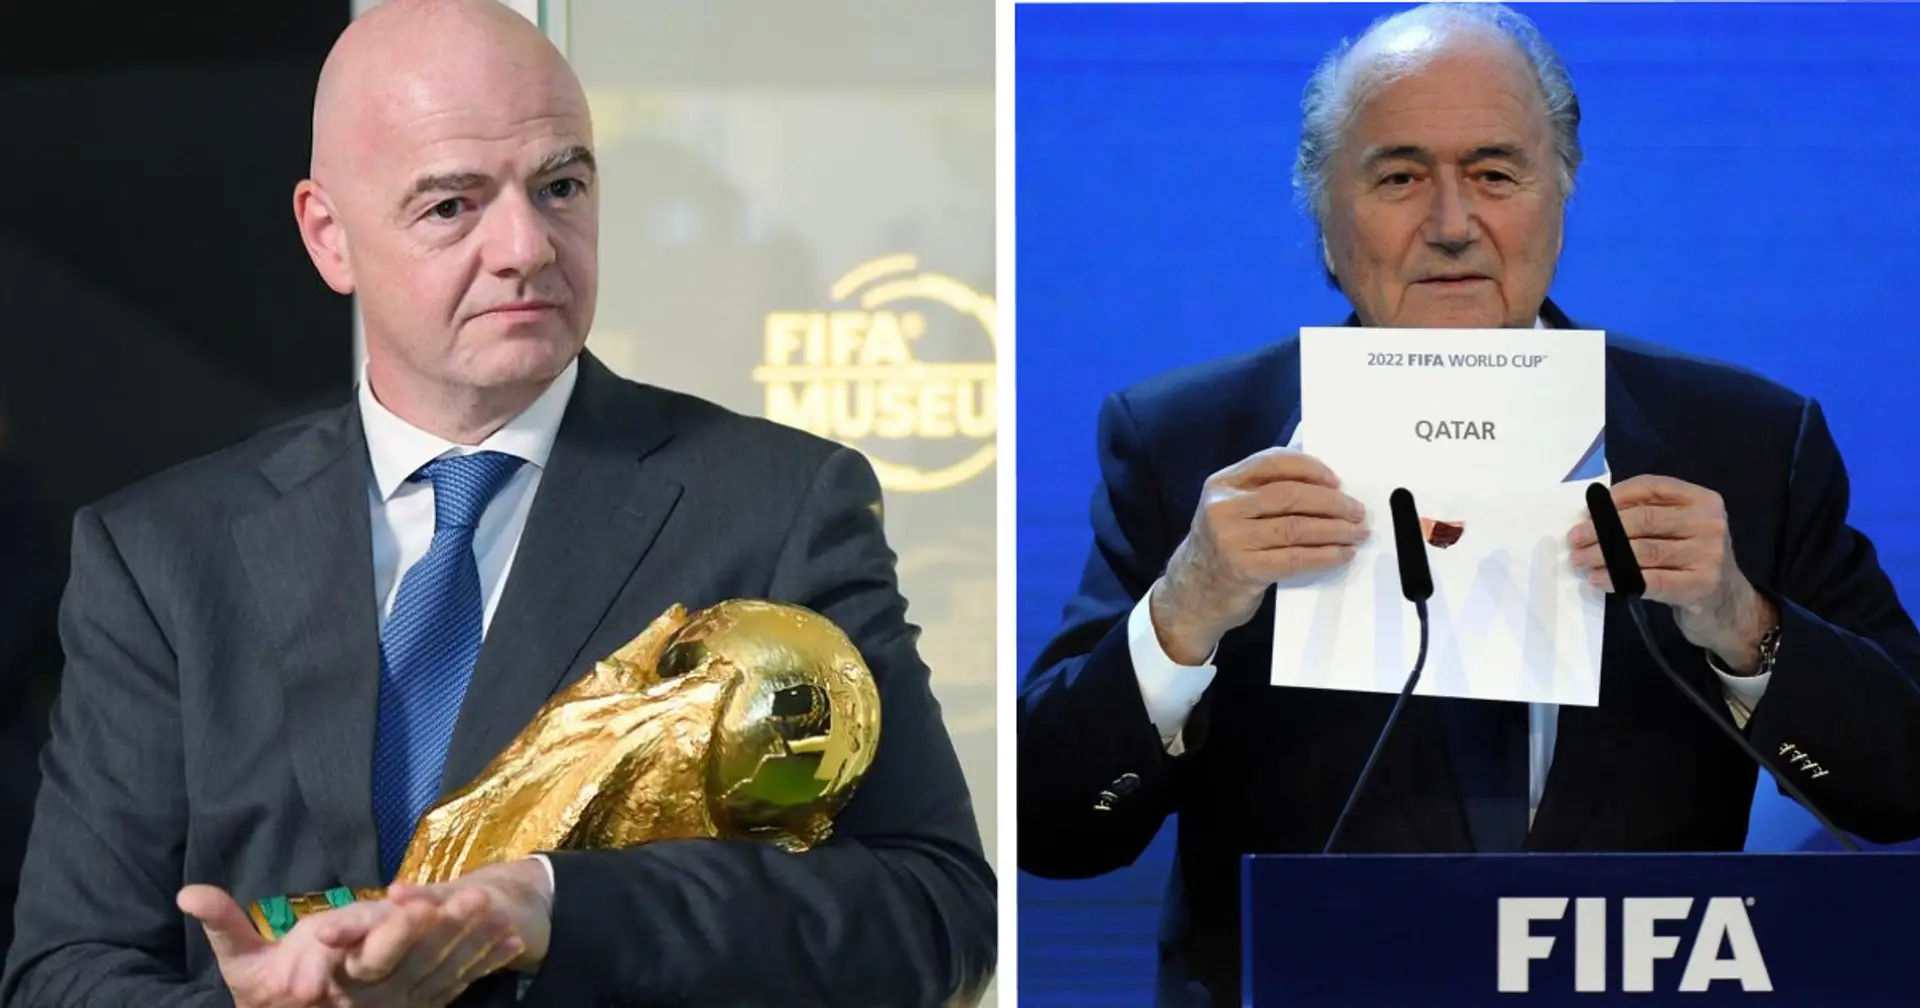 Ukraine, Morocco & 2 more countries to launch joint bid for hosting World Cup 2030